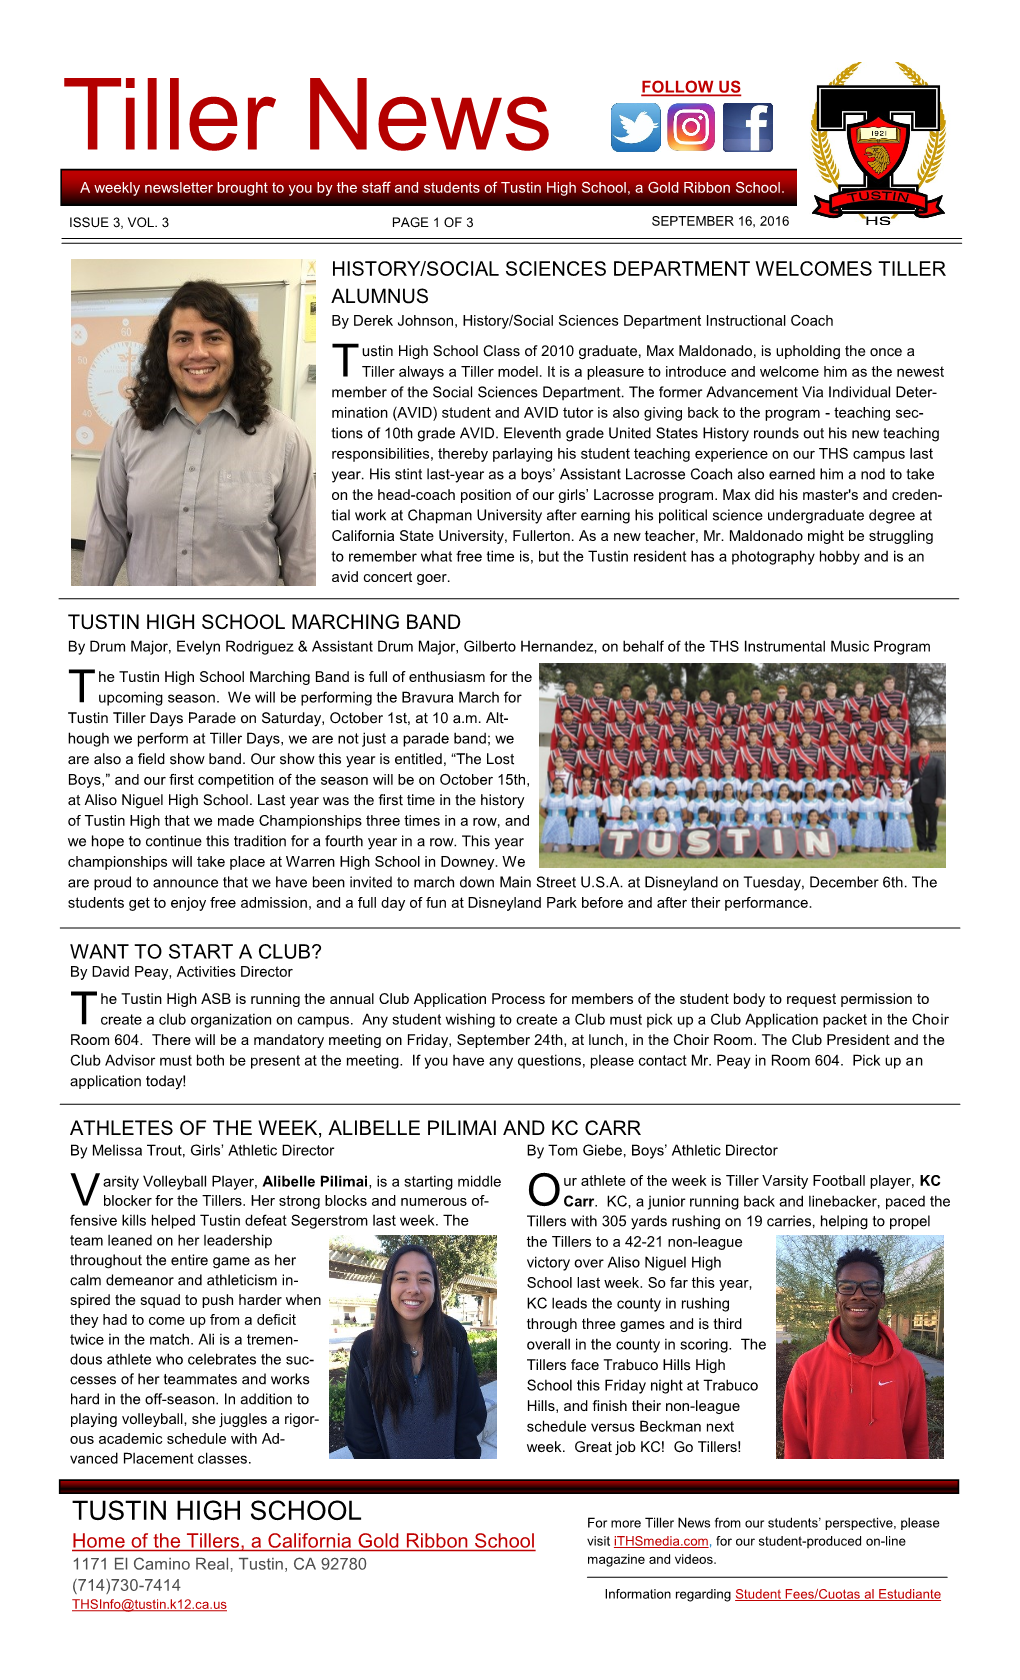 Tiller News FOLLOW US a Weekly Newsletter Brought to You by the Staff and Students of Tustin High School, a Gold Ribbon School